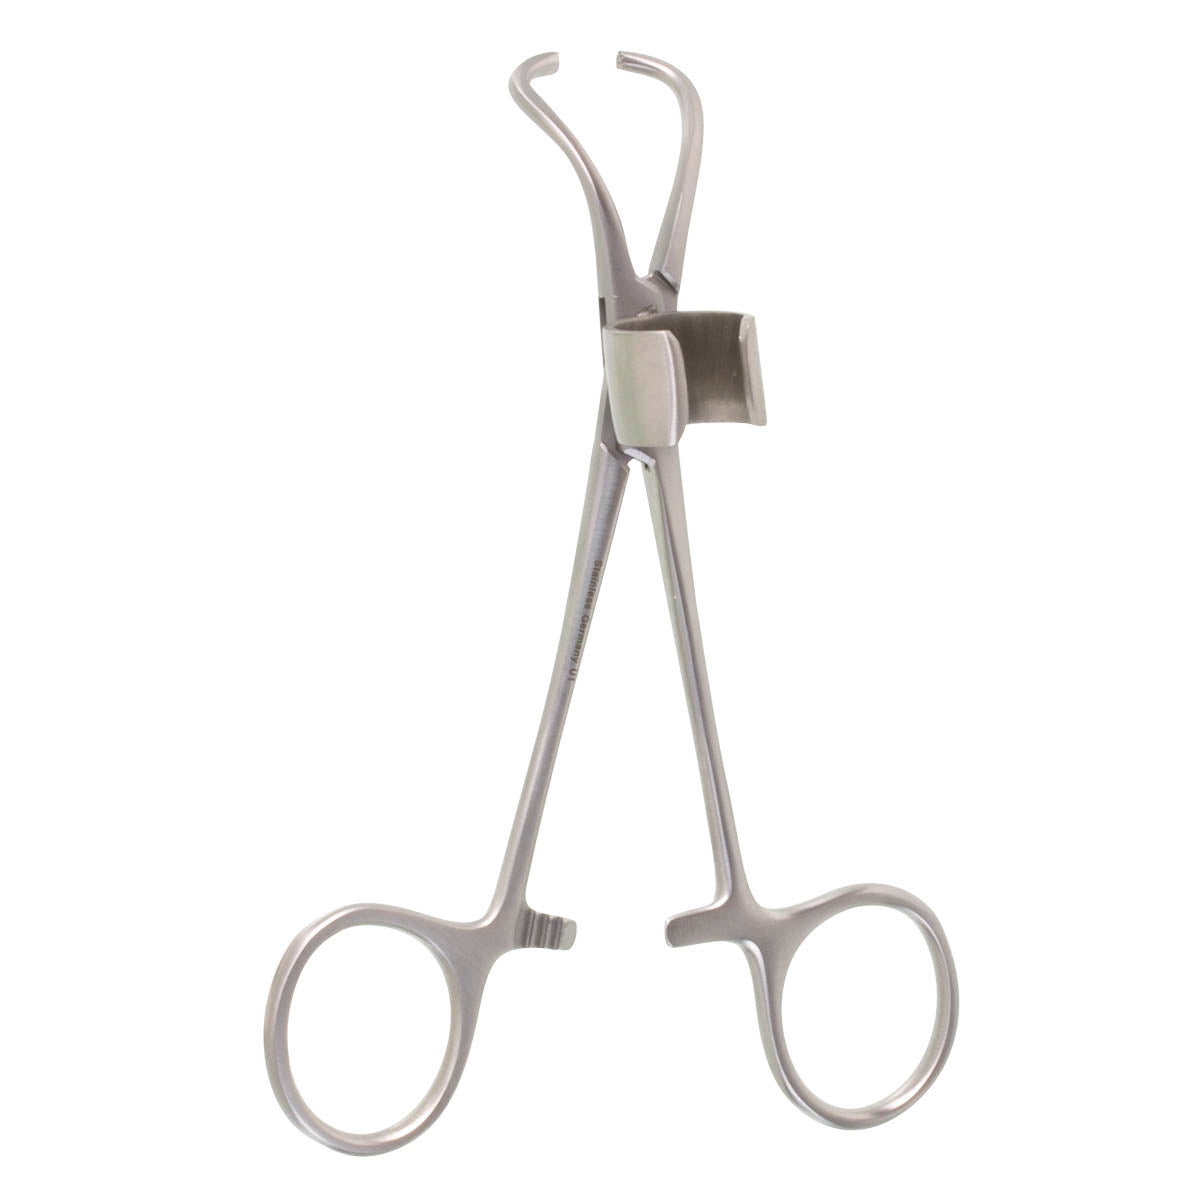 Towel Clamps for Tubing: 1.4cm